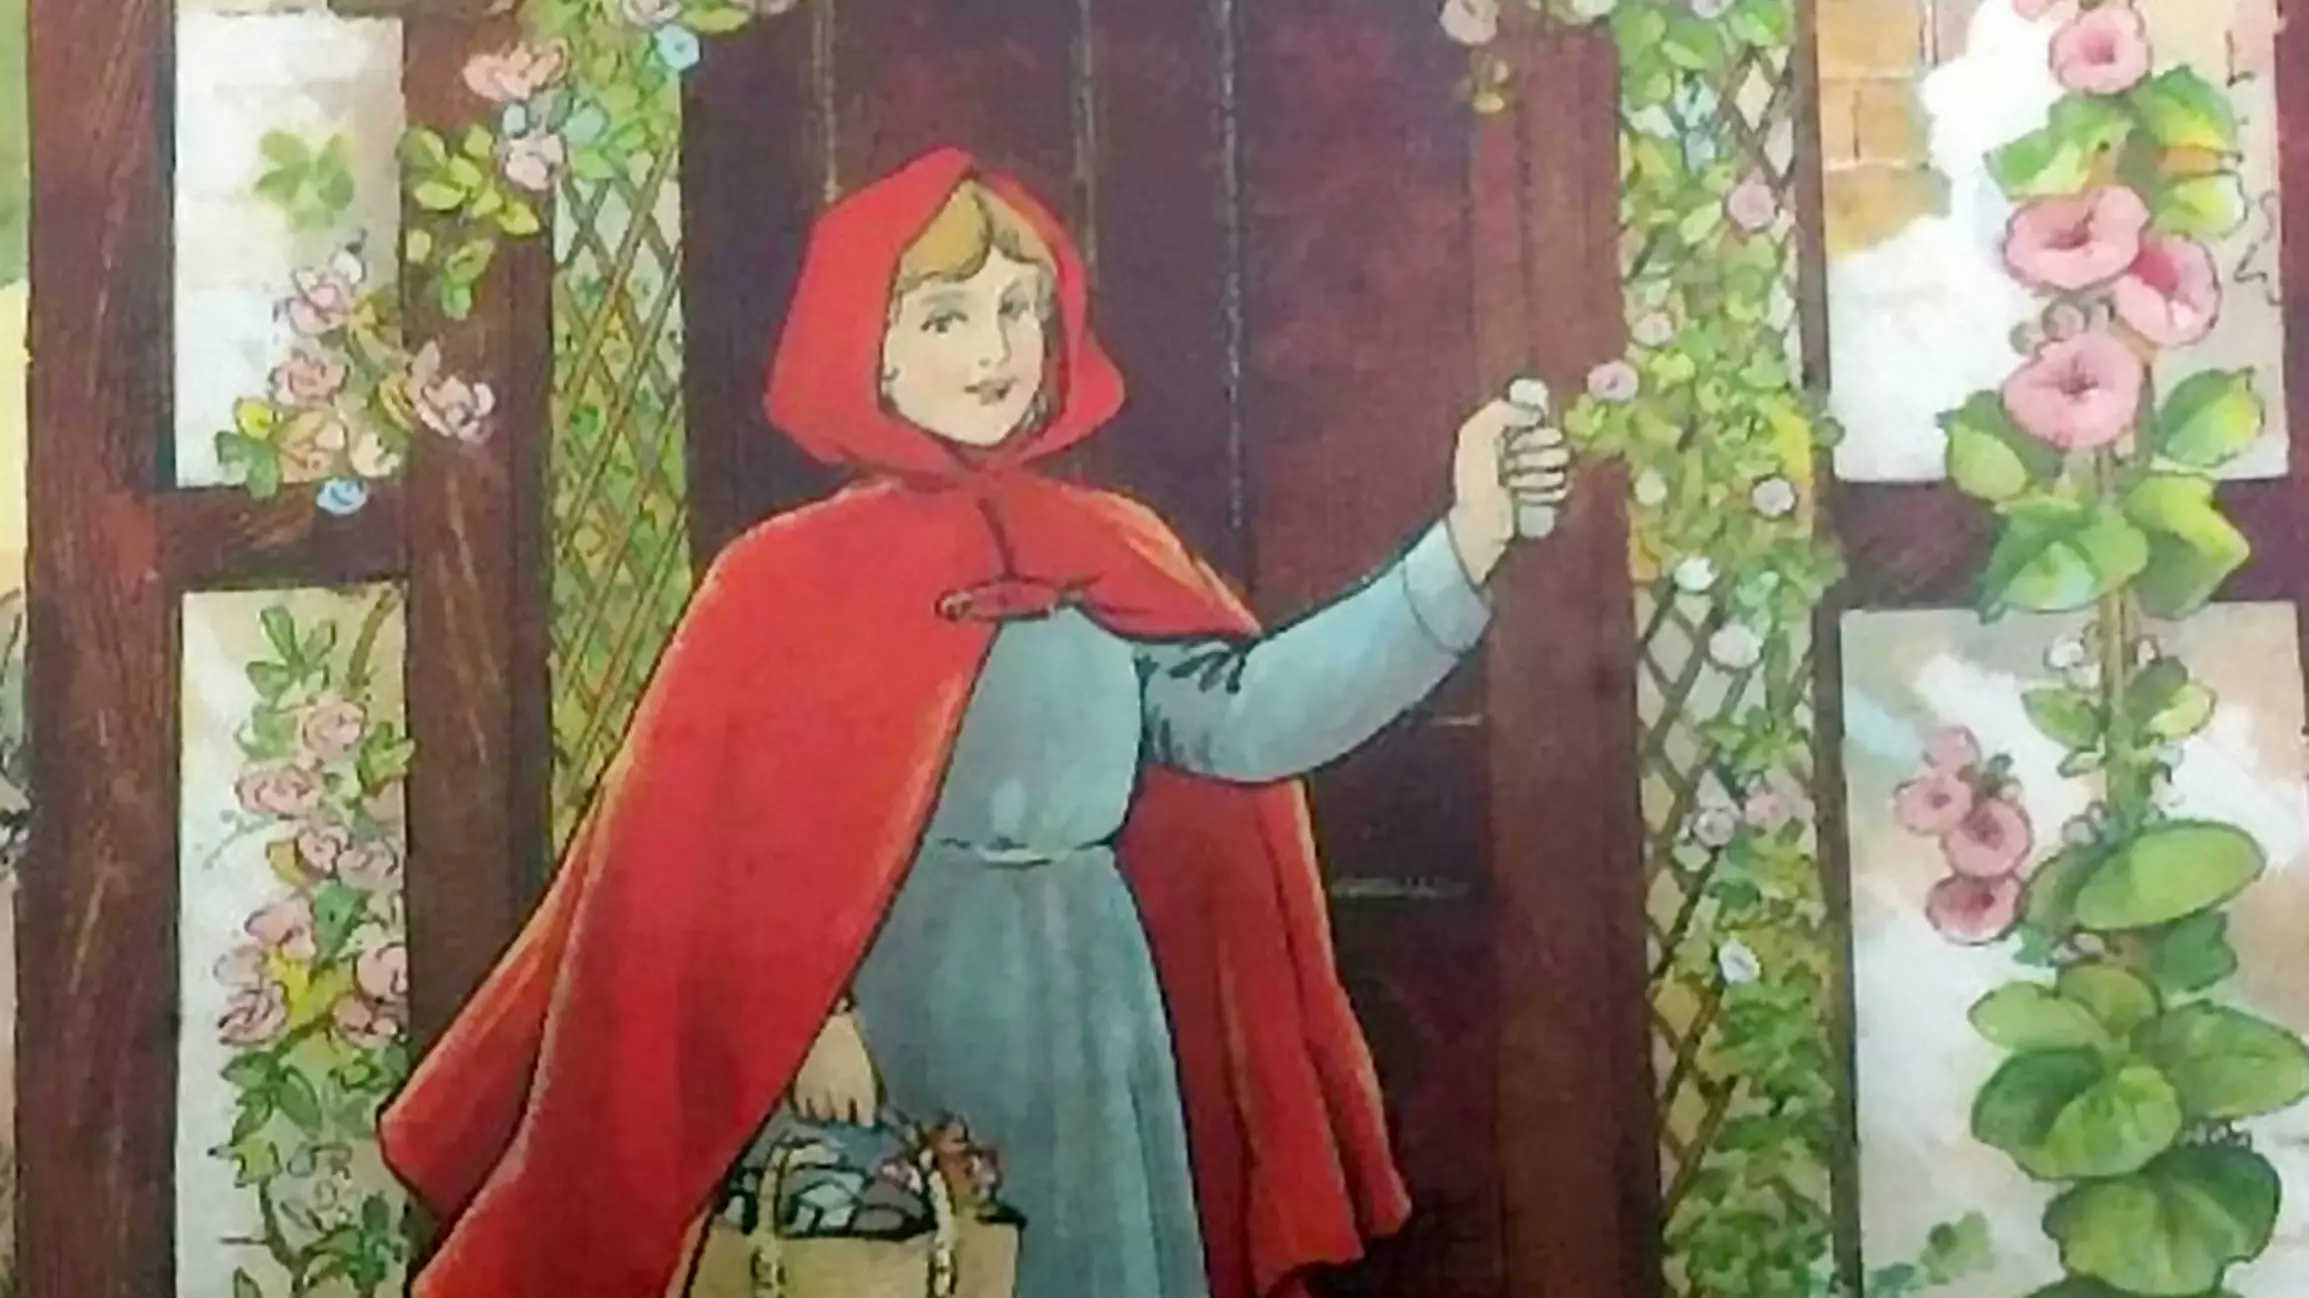 ​Parents Are Changing The 'Inappropriate' Endings To Classic Fairytales